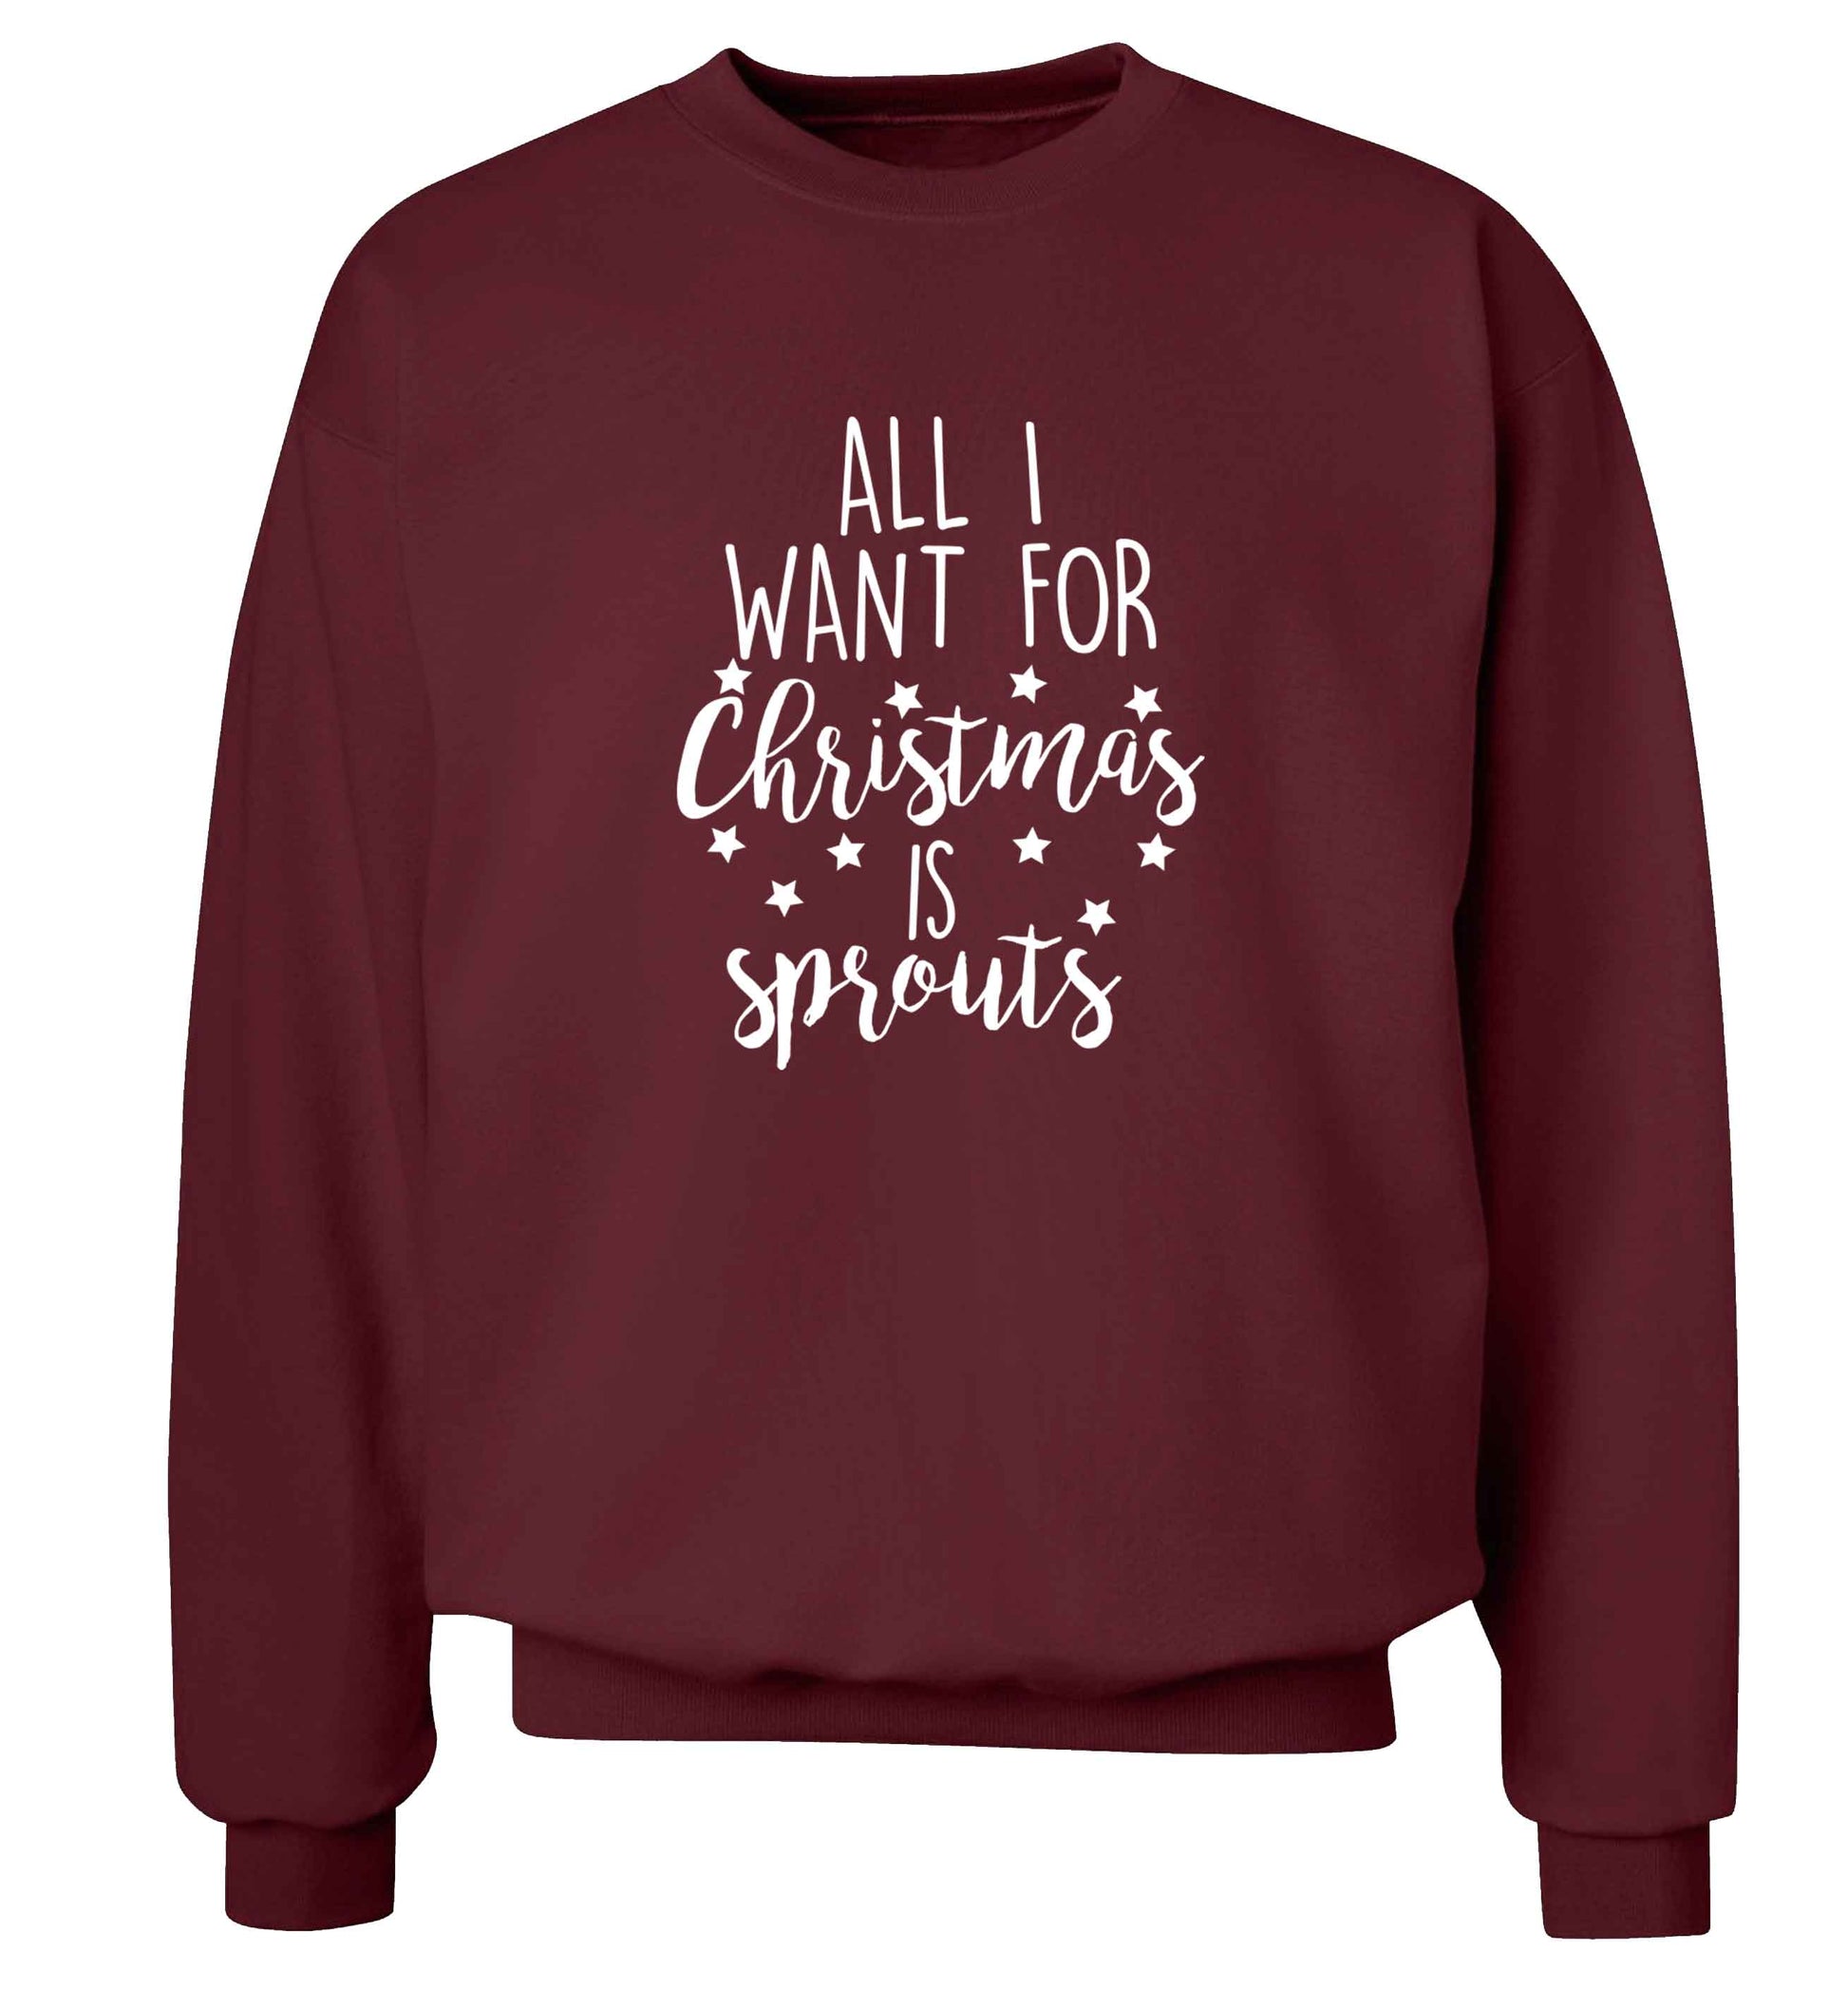 All I want for Christmas is sprouts adult's unisex maroon sweater 2XL